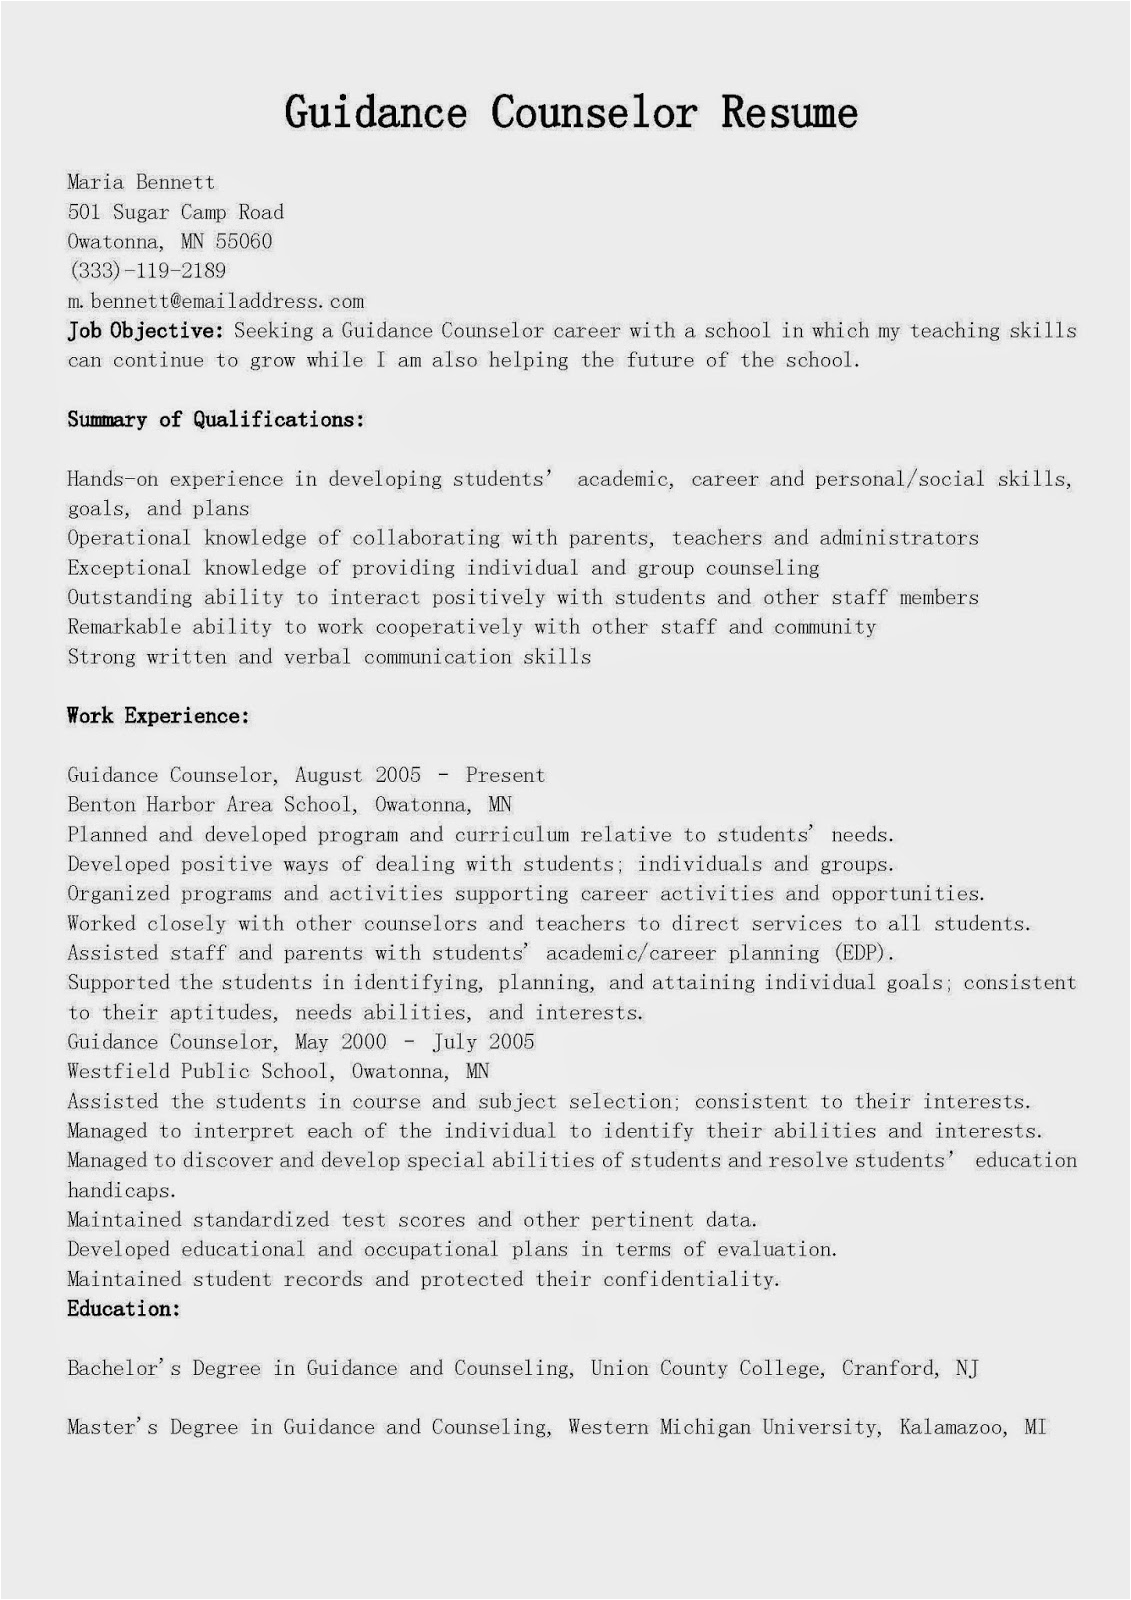 Sample Resume Outline for Counseling Position Resume Samples Guidance Counselor Resume Sample